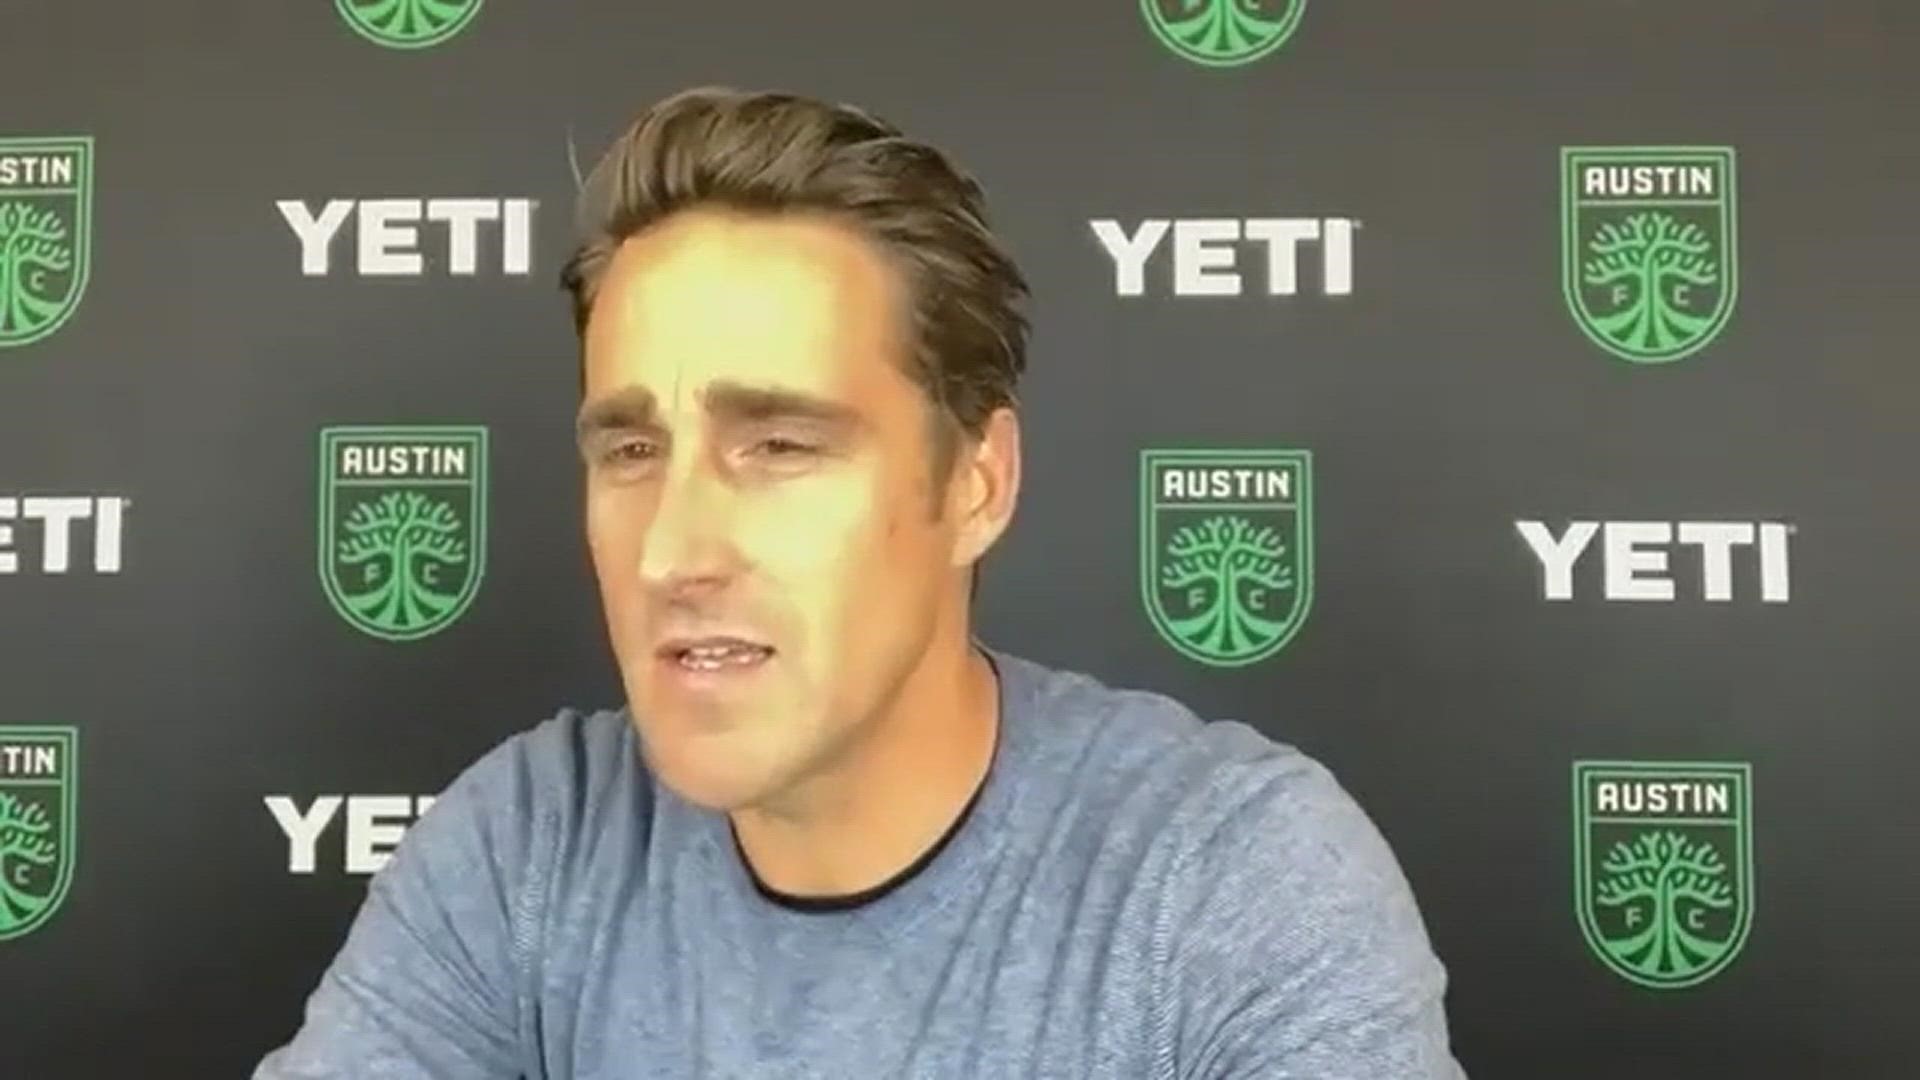 Austin FC head coach Josh Wolff and midfielder Alex Ring speak to the media after the club's 3-0 loss to the Portland Timbers.